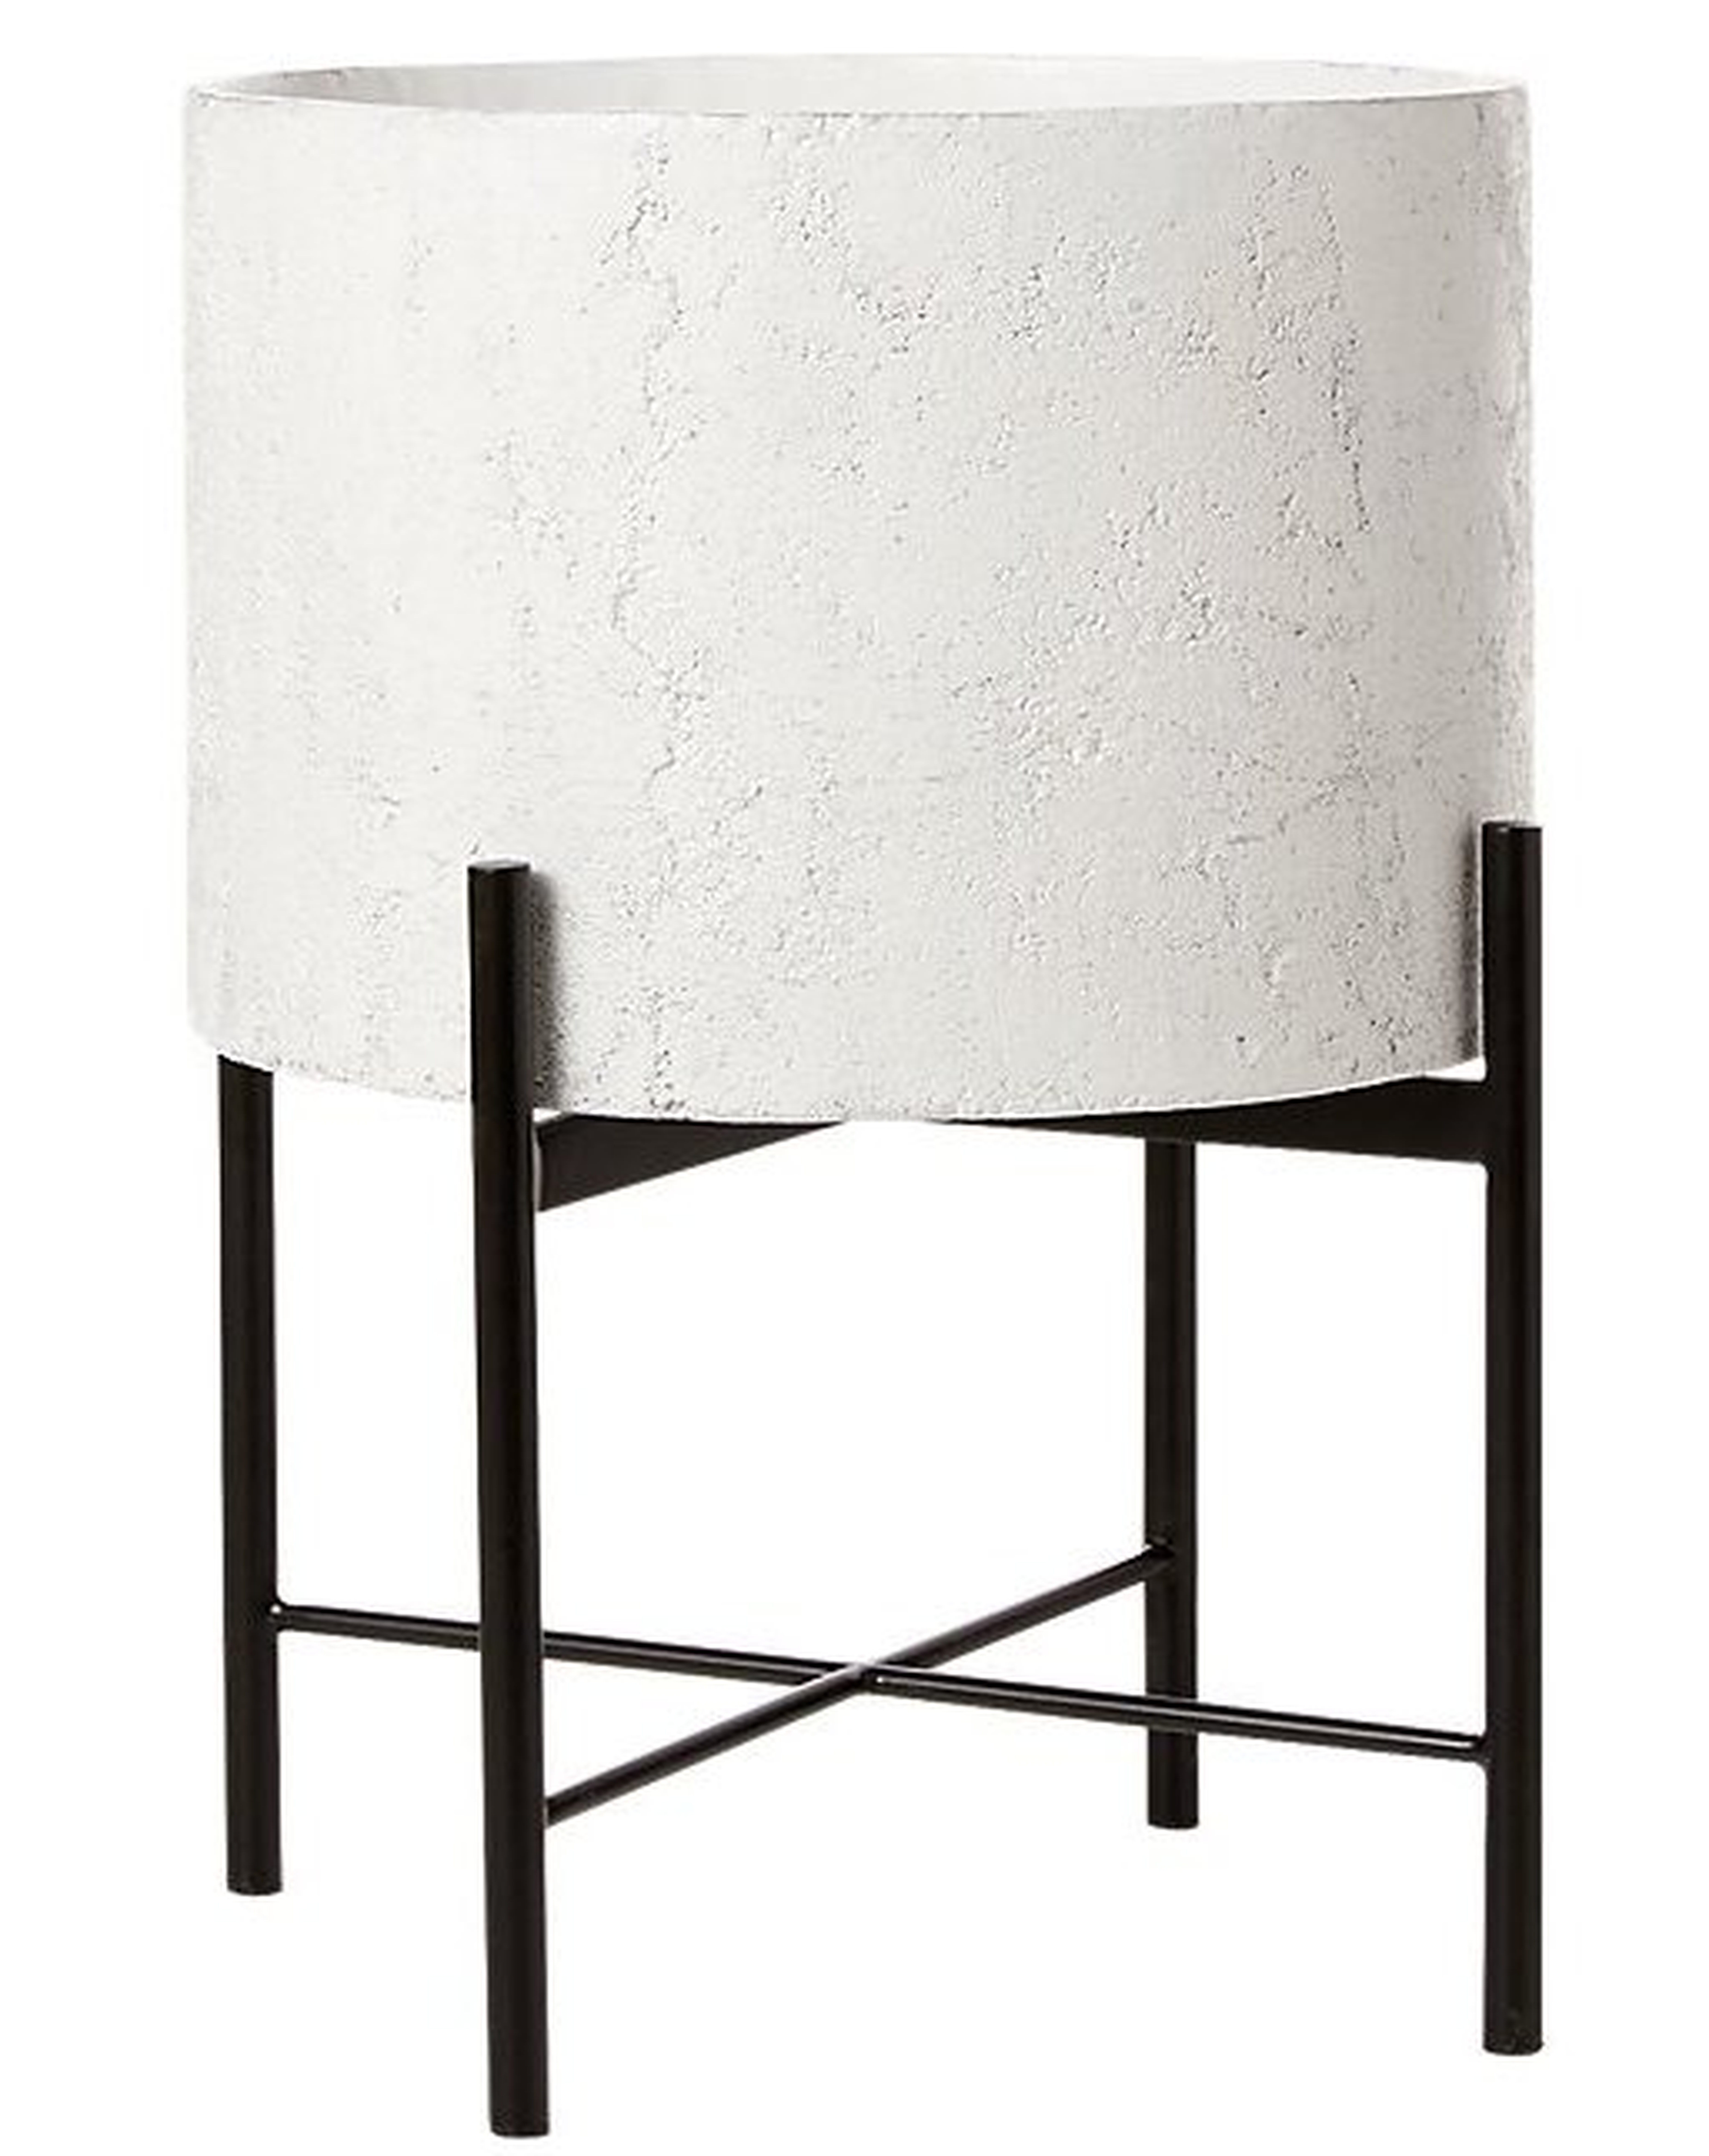 FIORE PLANTER LARGE WITH STAND - CB2